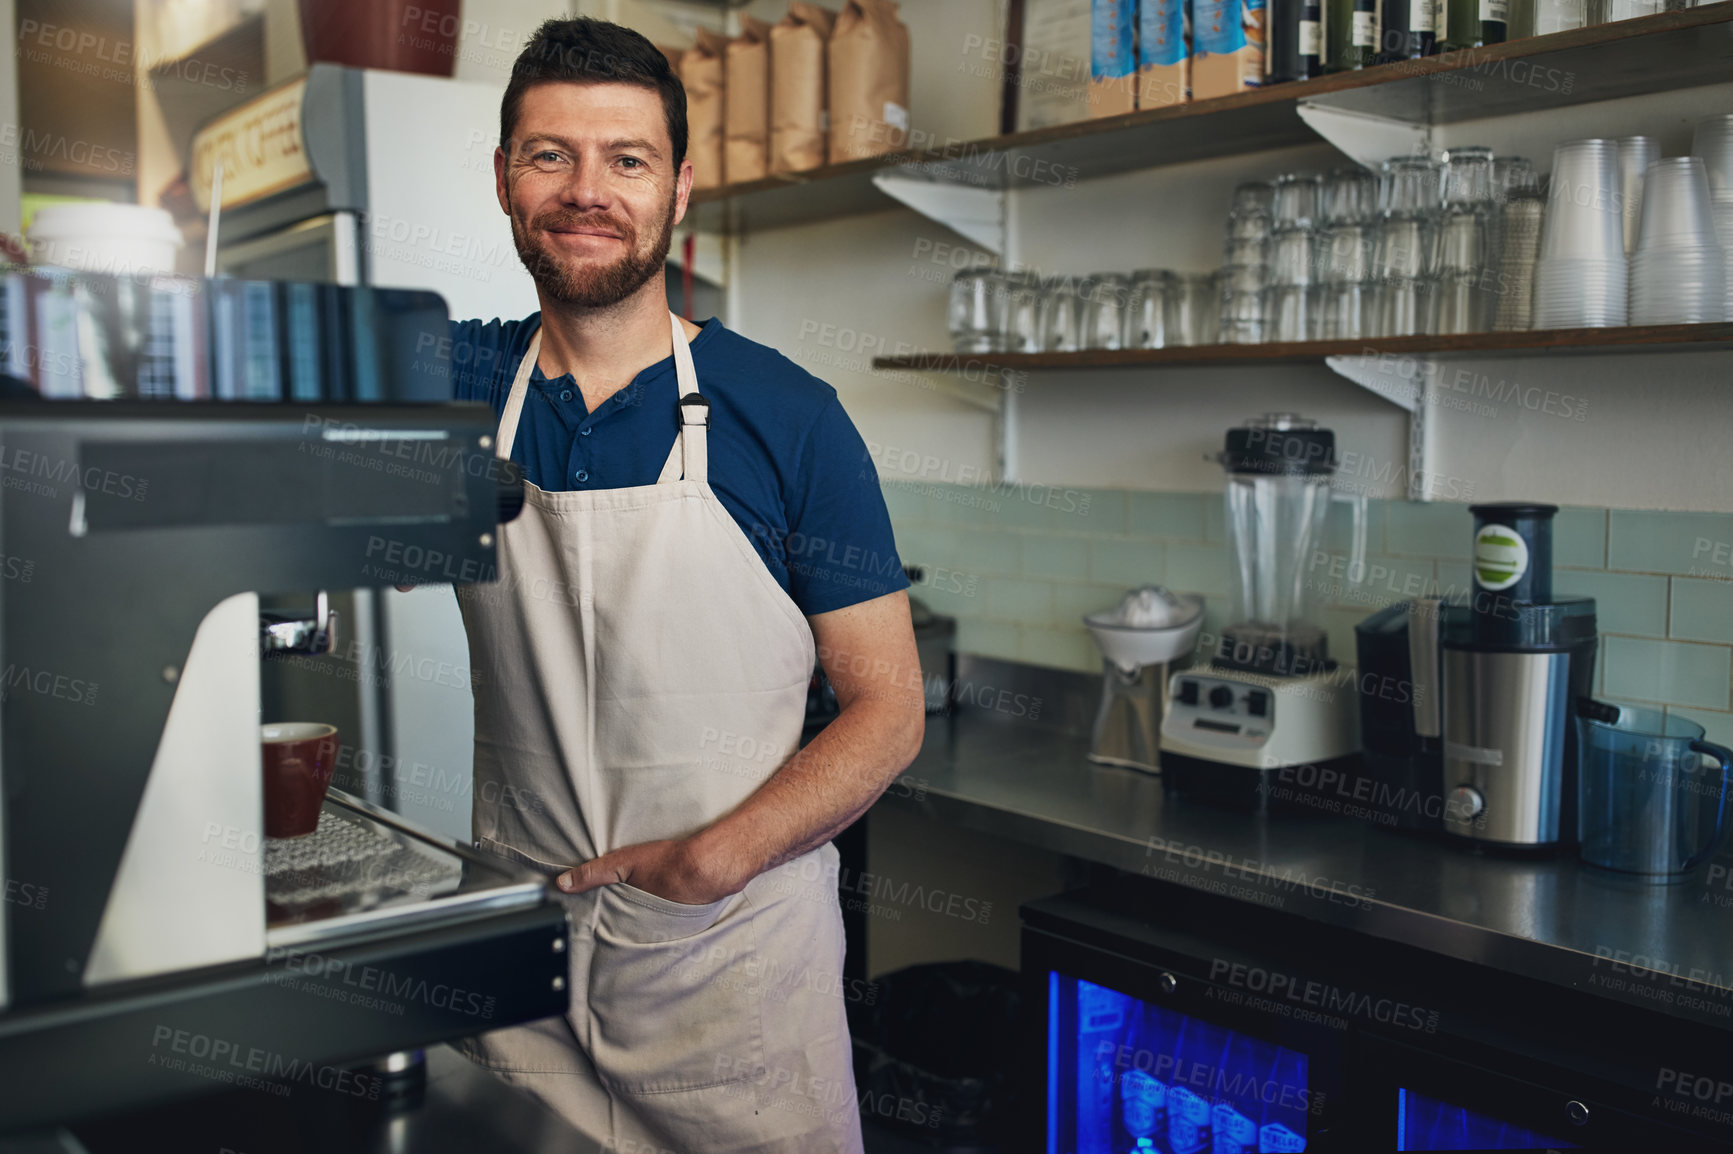 Buy stock photo Portrait of a mature man working in a coffee shop